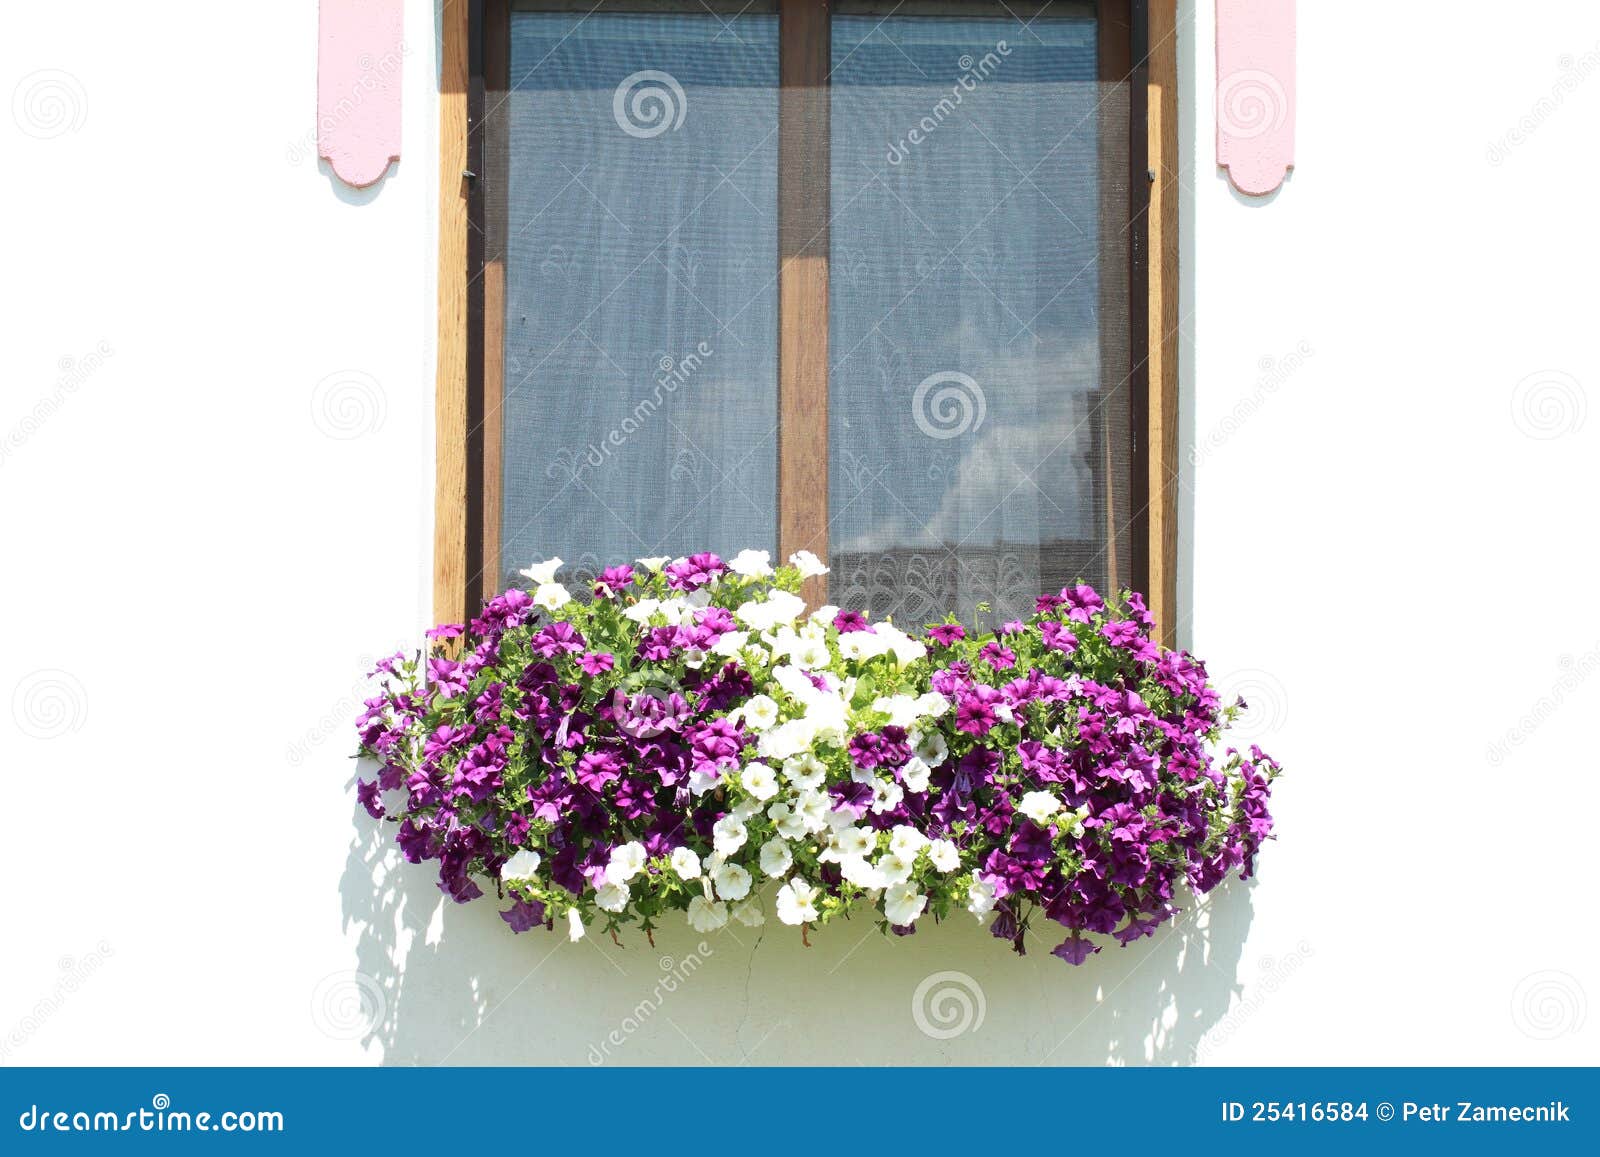 window with lila and white flowers